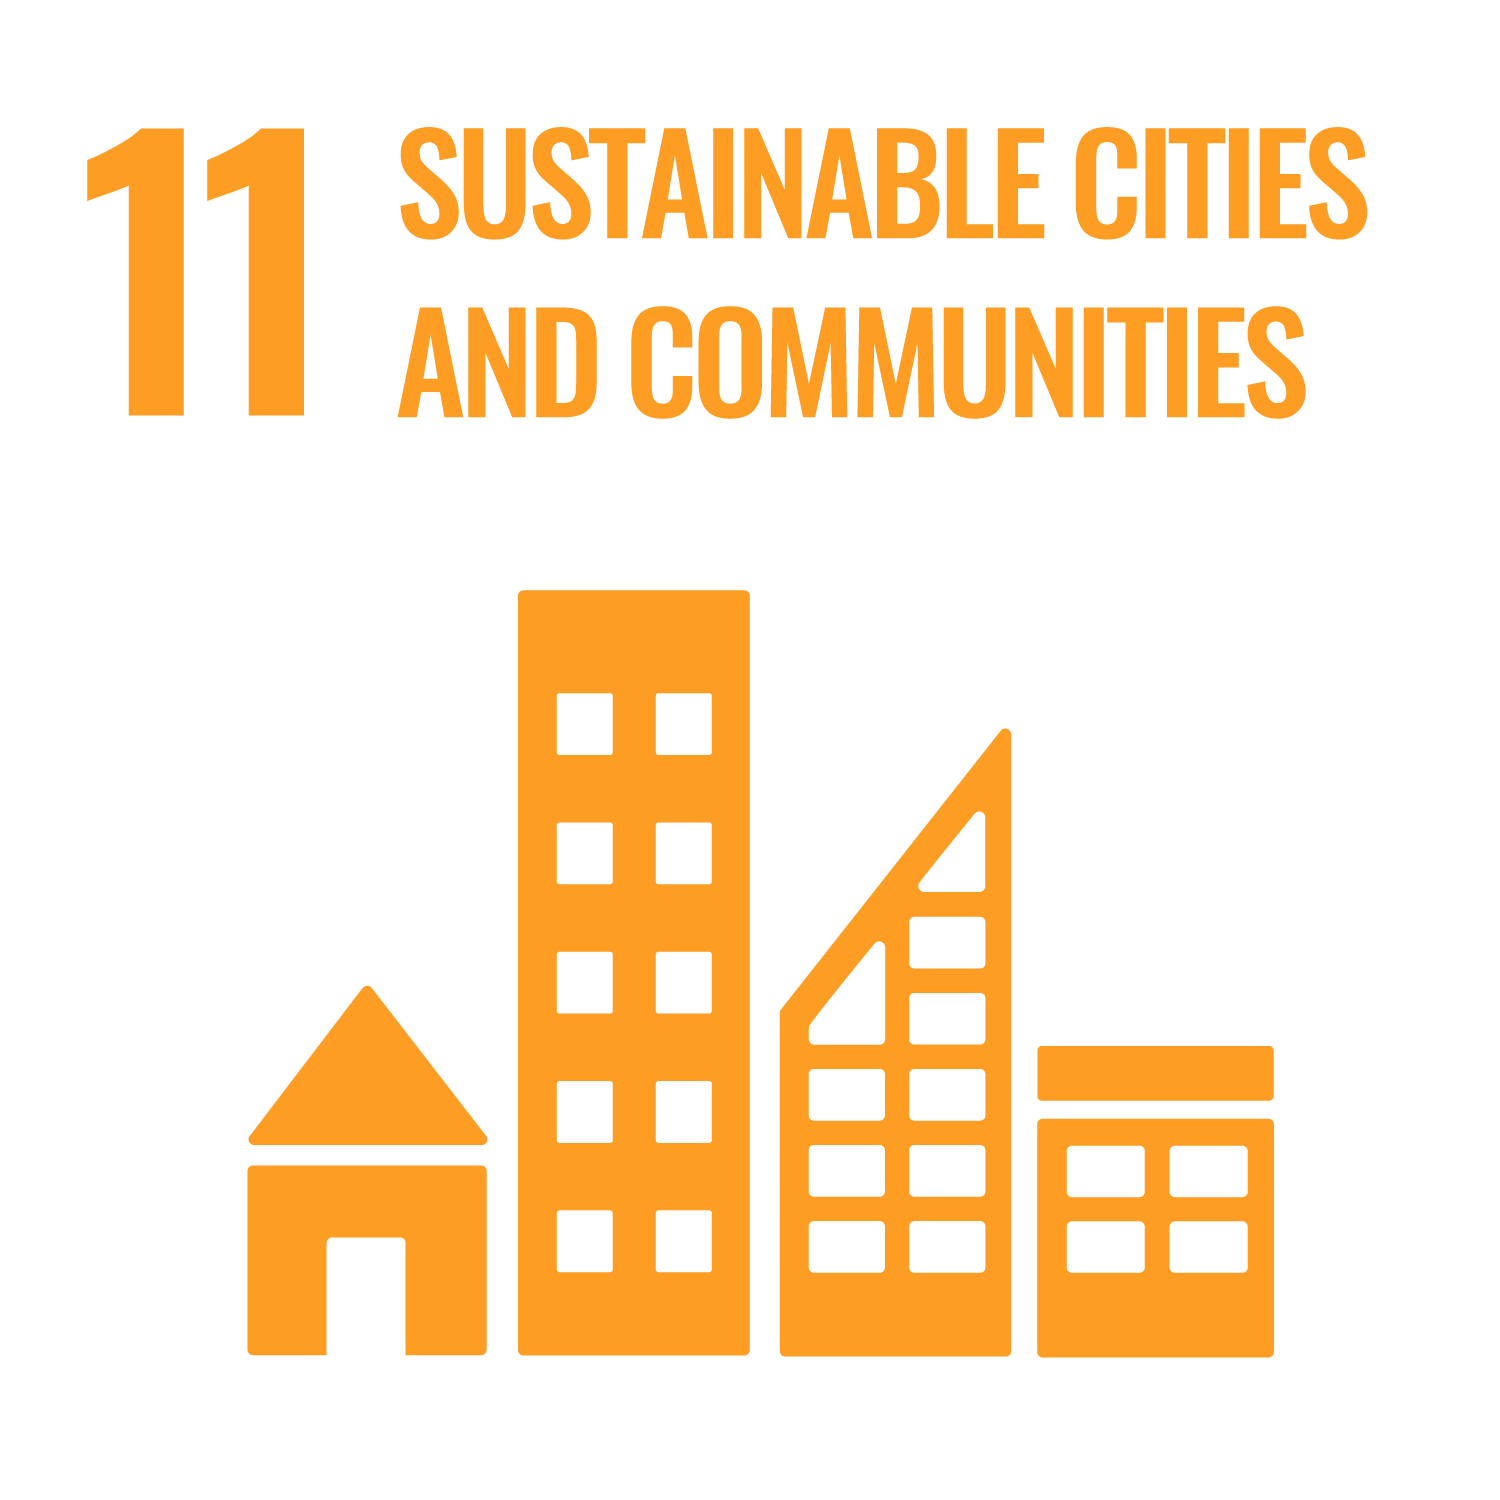 UN SDG 11: Sustainable cities and communities